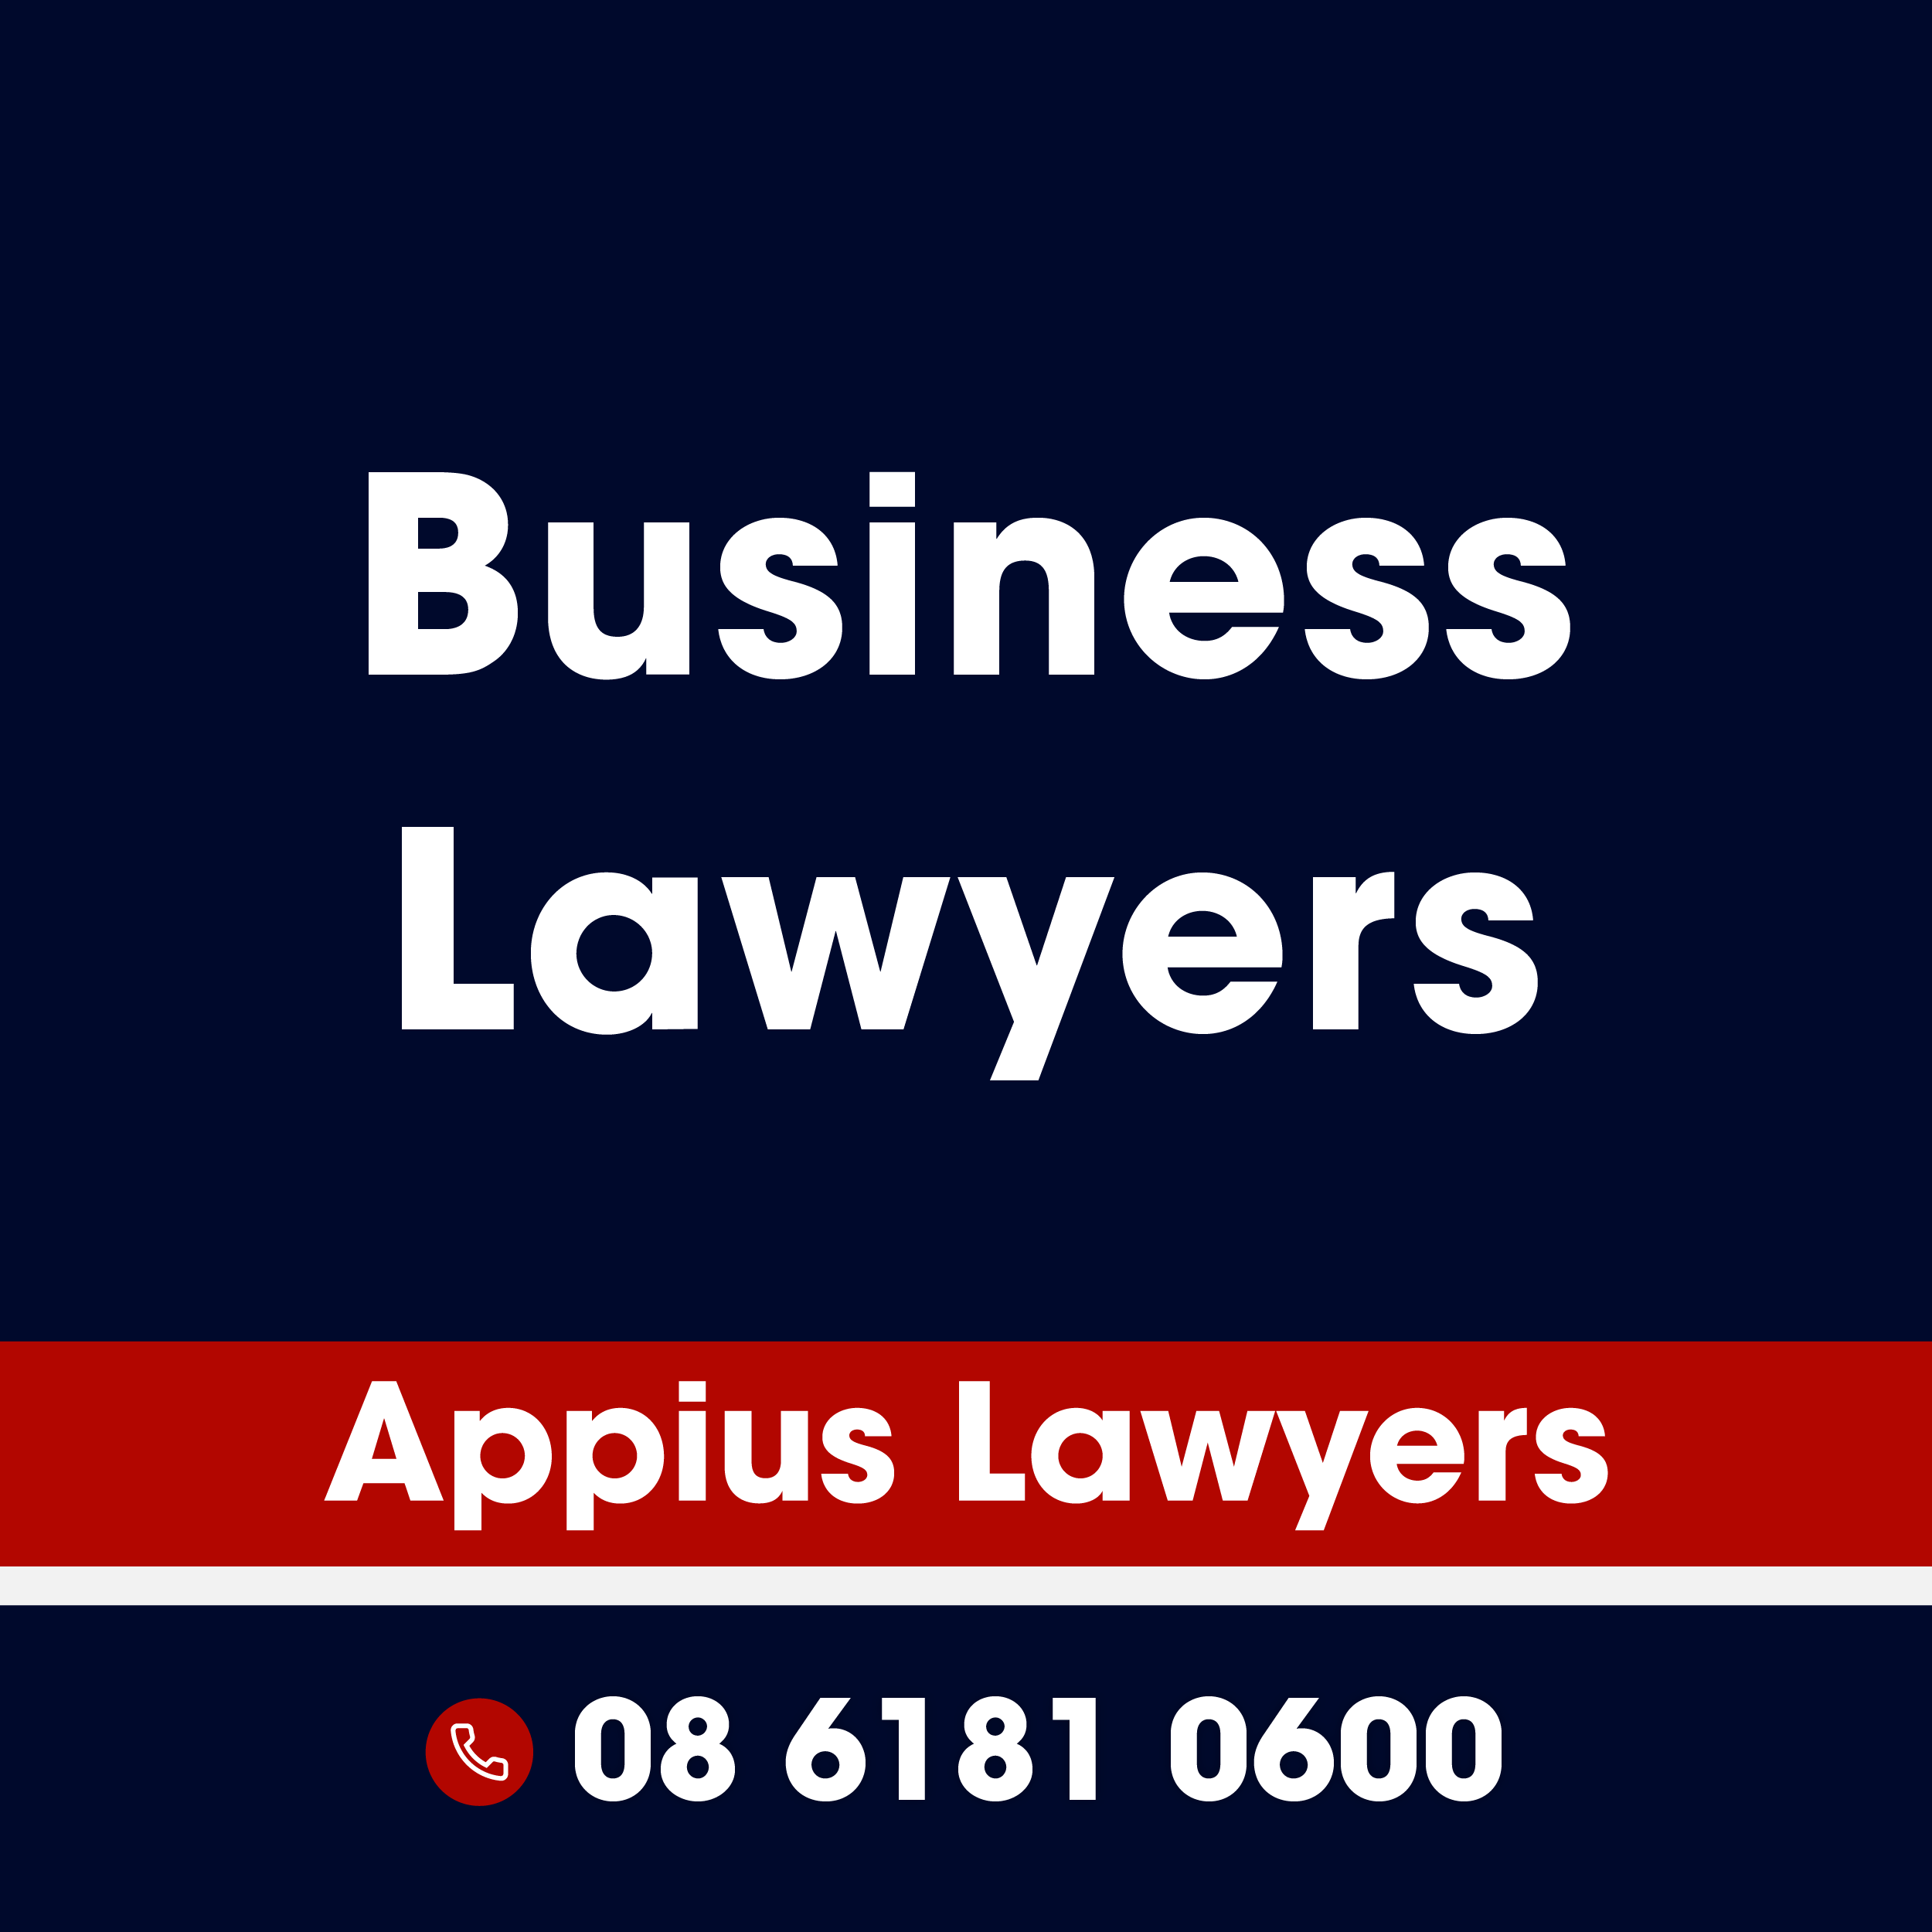 Business Lawyers in Balcatta, WA - Commercial & Contract Lawyers